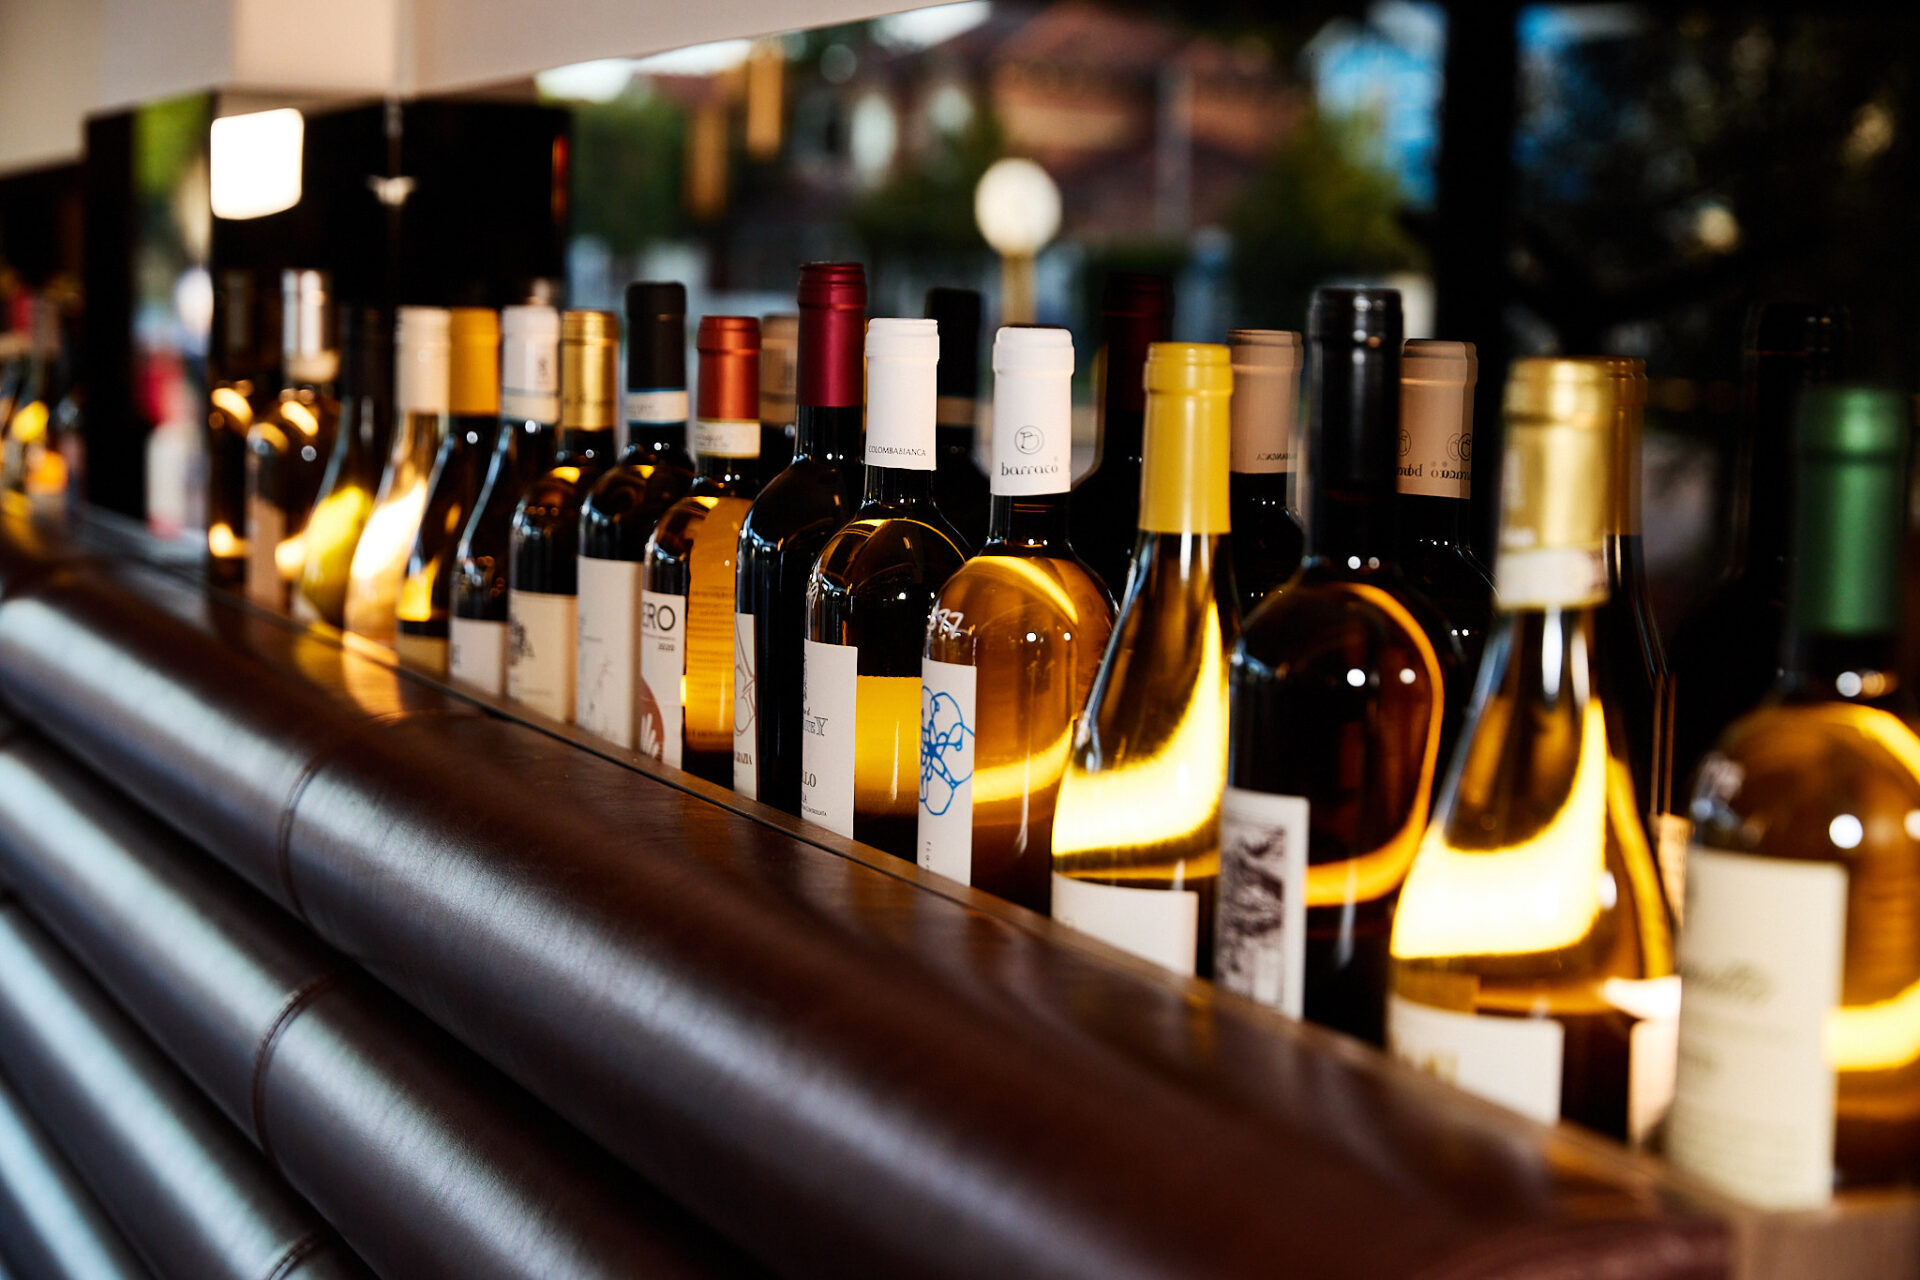 View of bar shelf with a row of wine bottles standing up